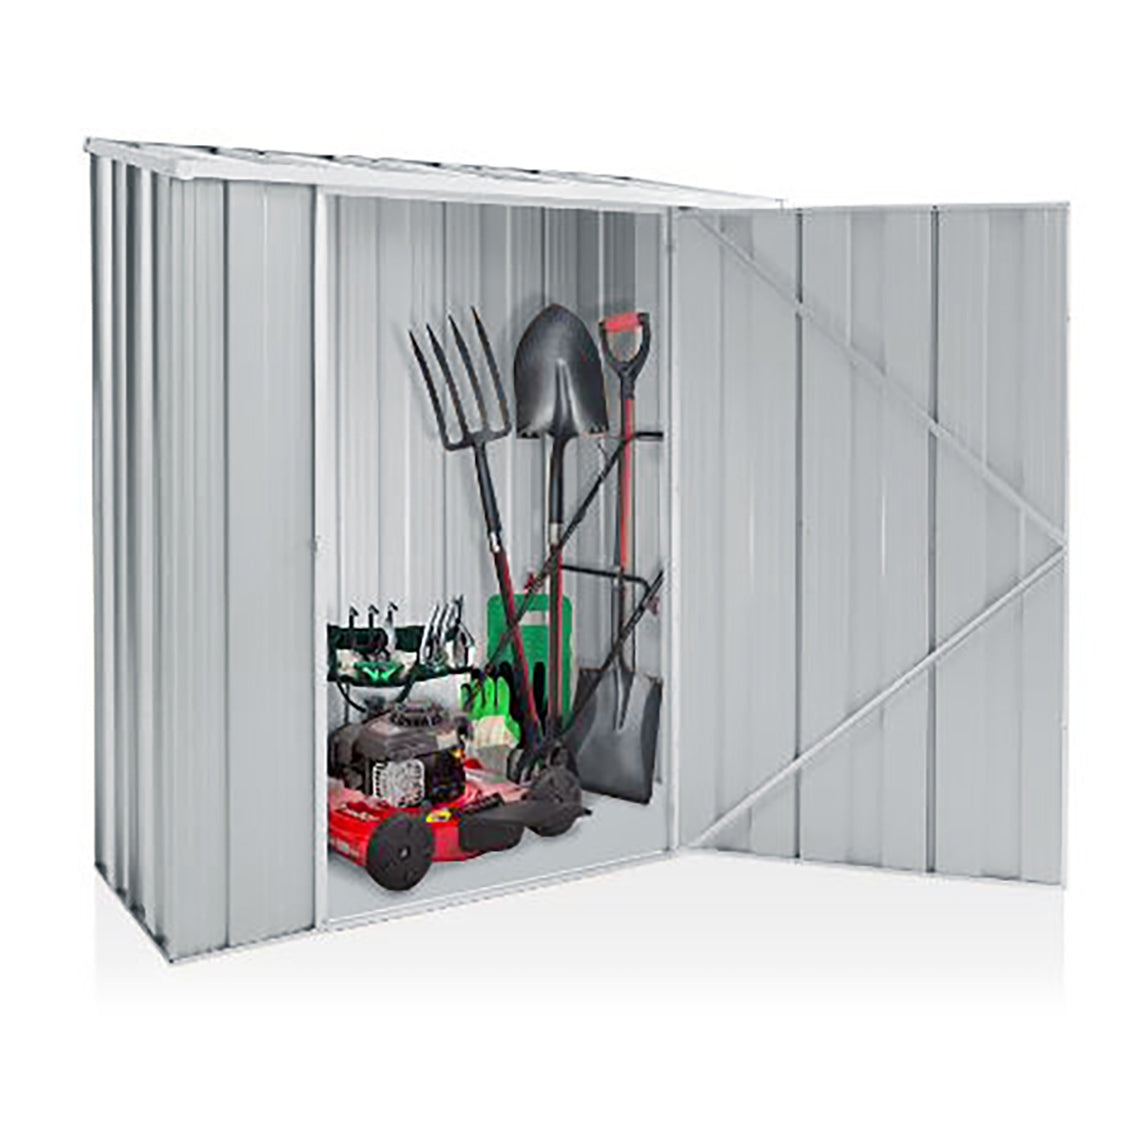 Medium Silver Metal Storage Shed for Garden and Backyard